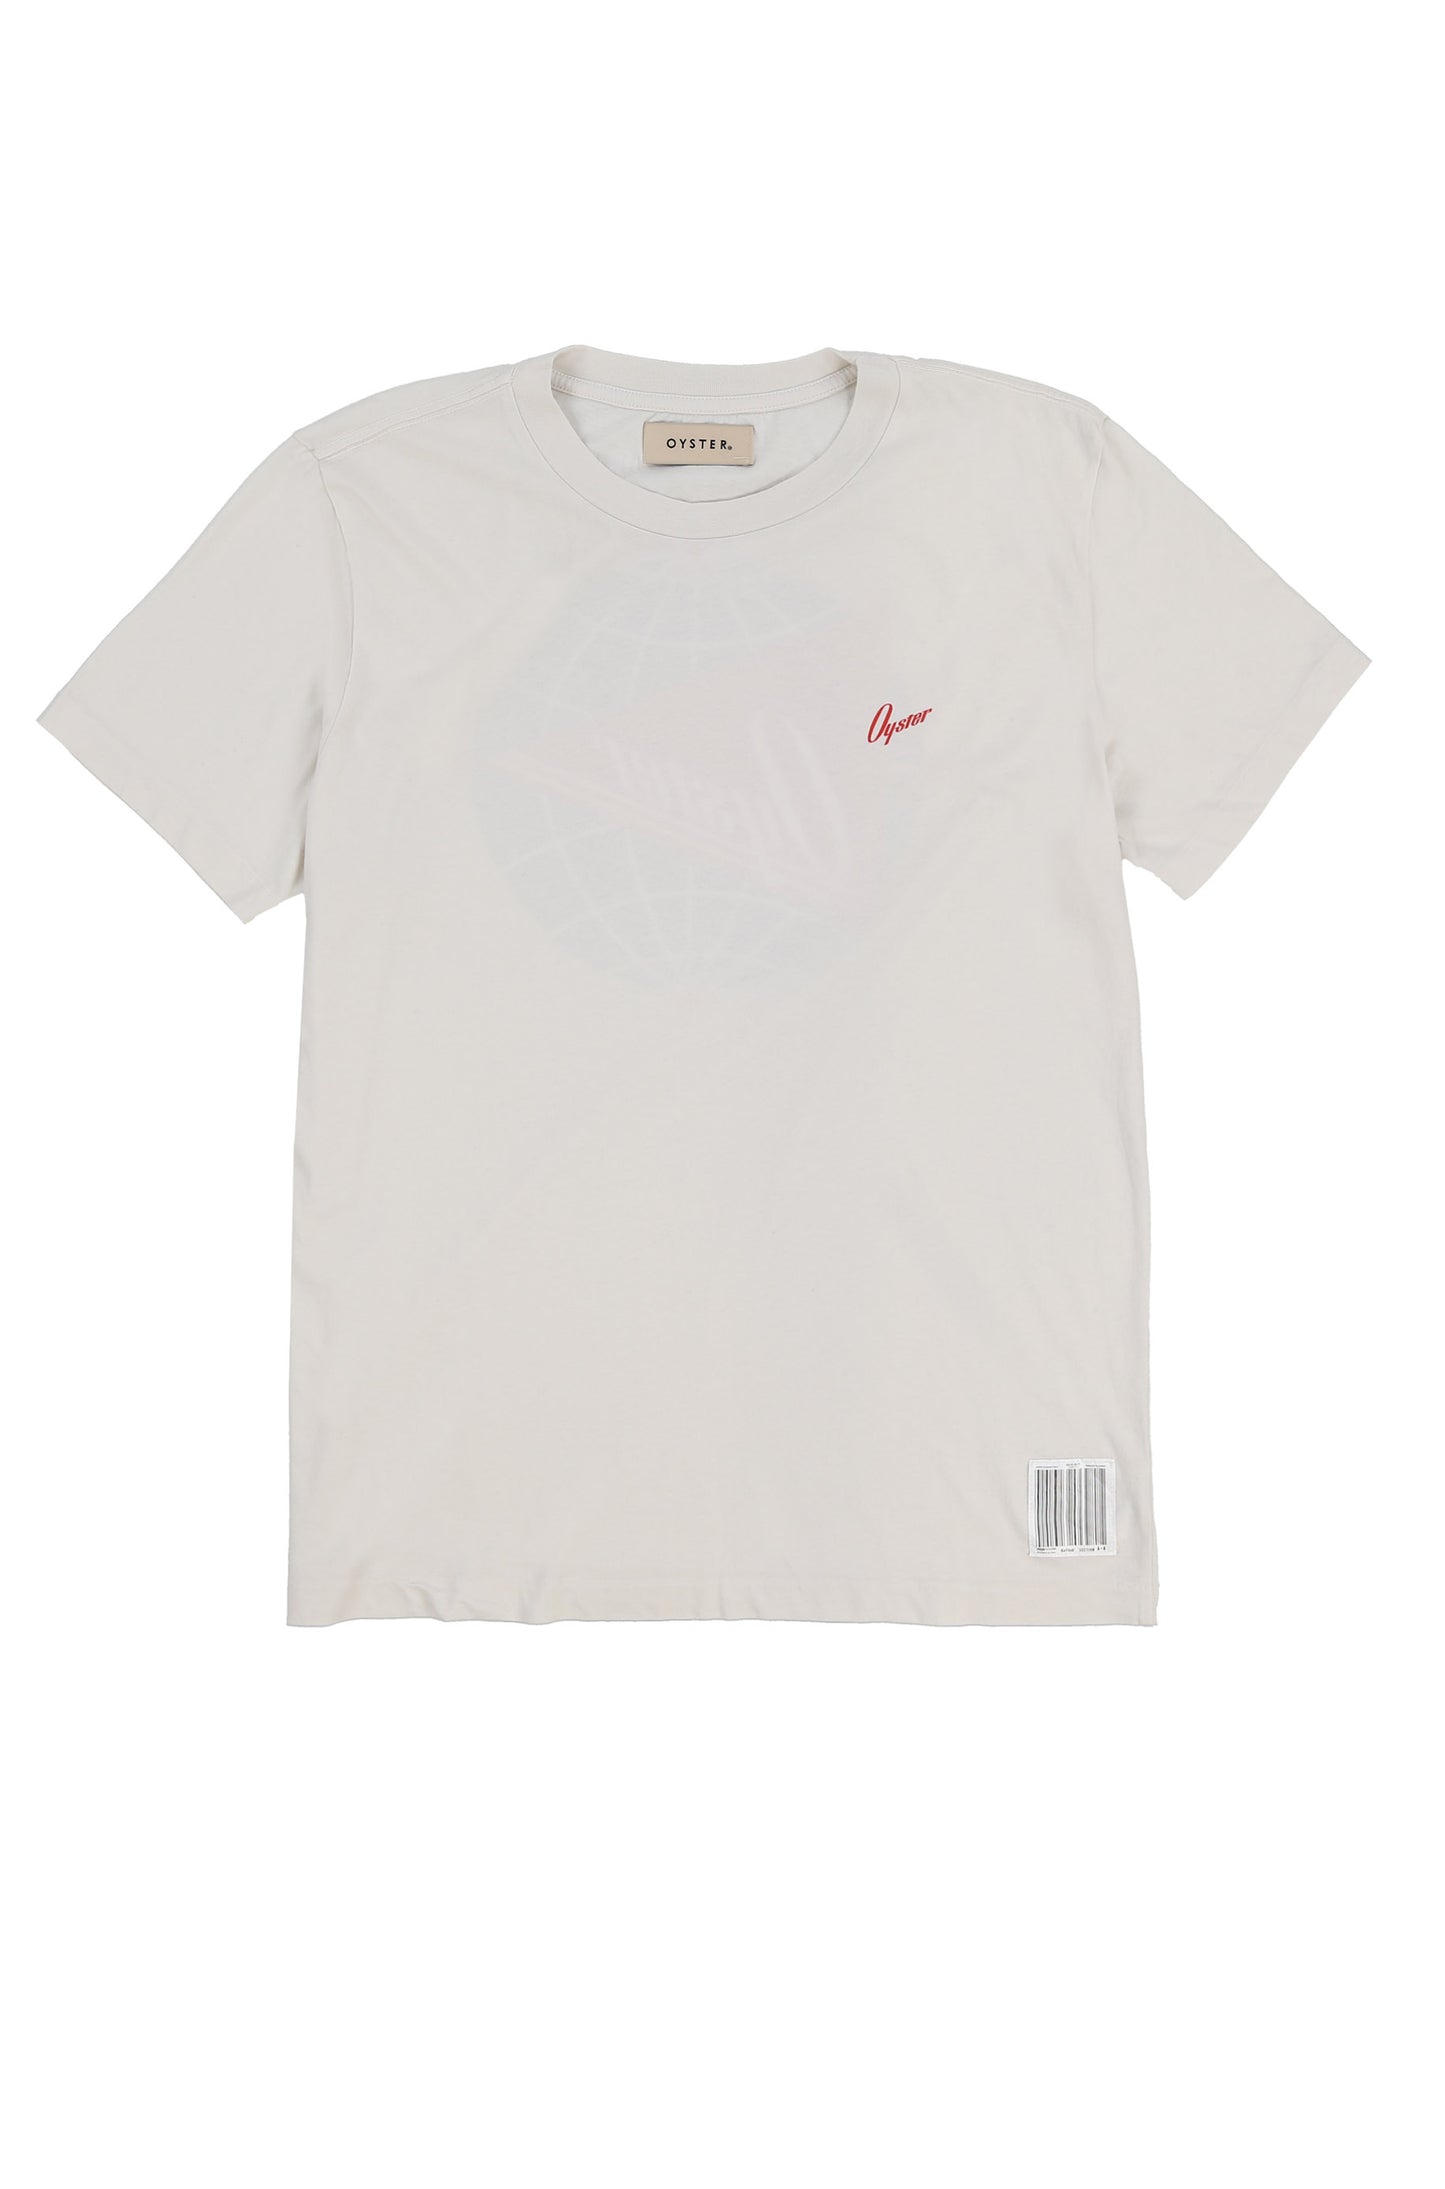 OYSTER PENNANT TEE (VINTAGE WHITE)